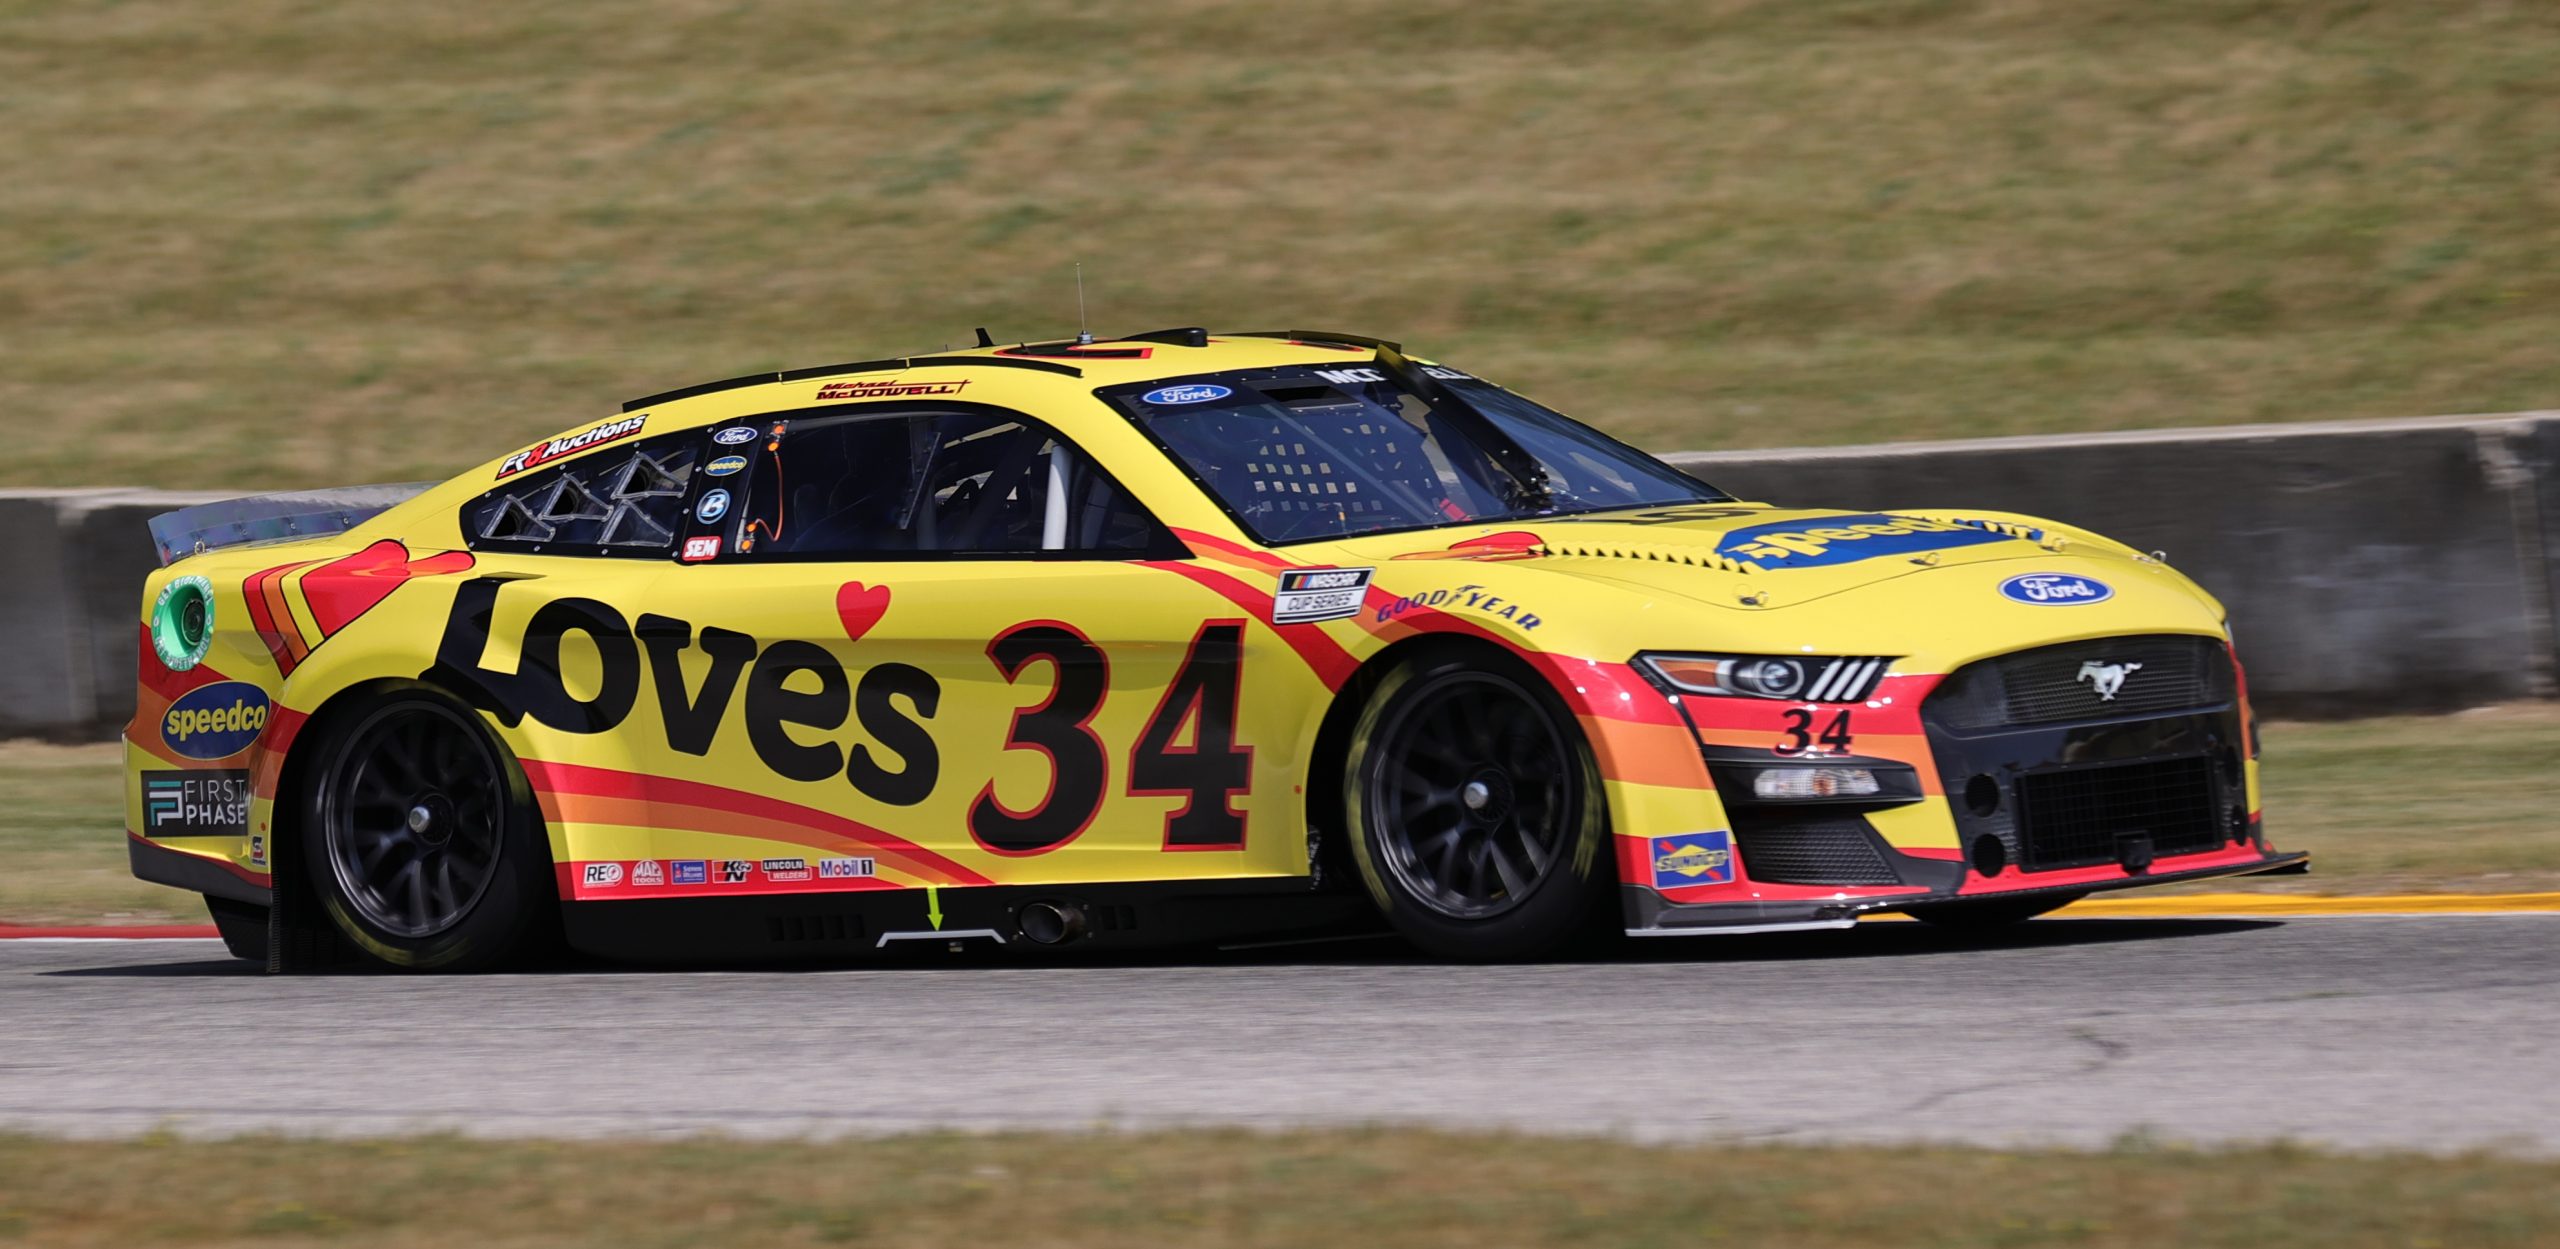 A victory at Road America may do wonders for McDowell and his No. 34 team. (Photo: Mike Moore | The Podium Finish)